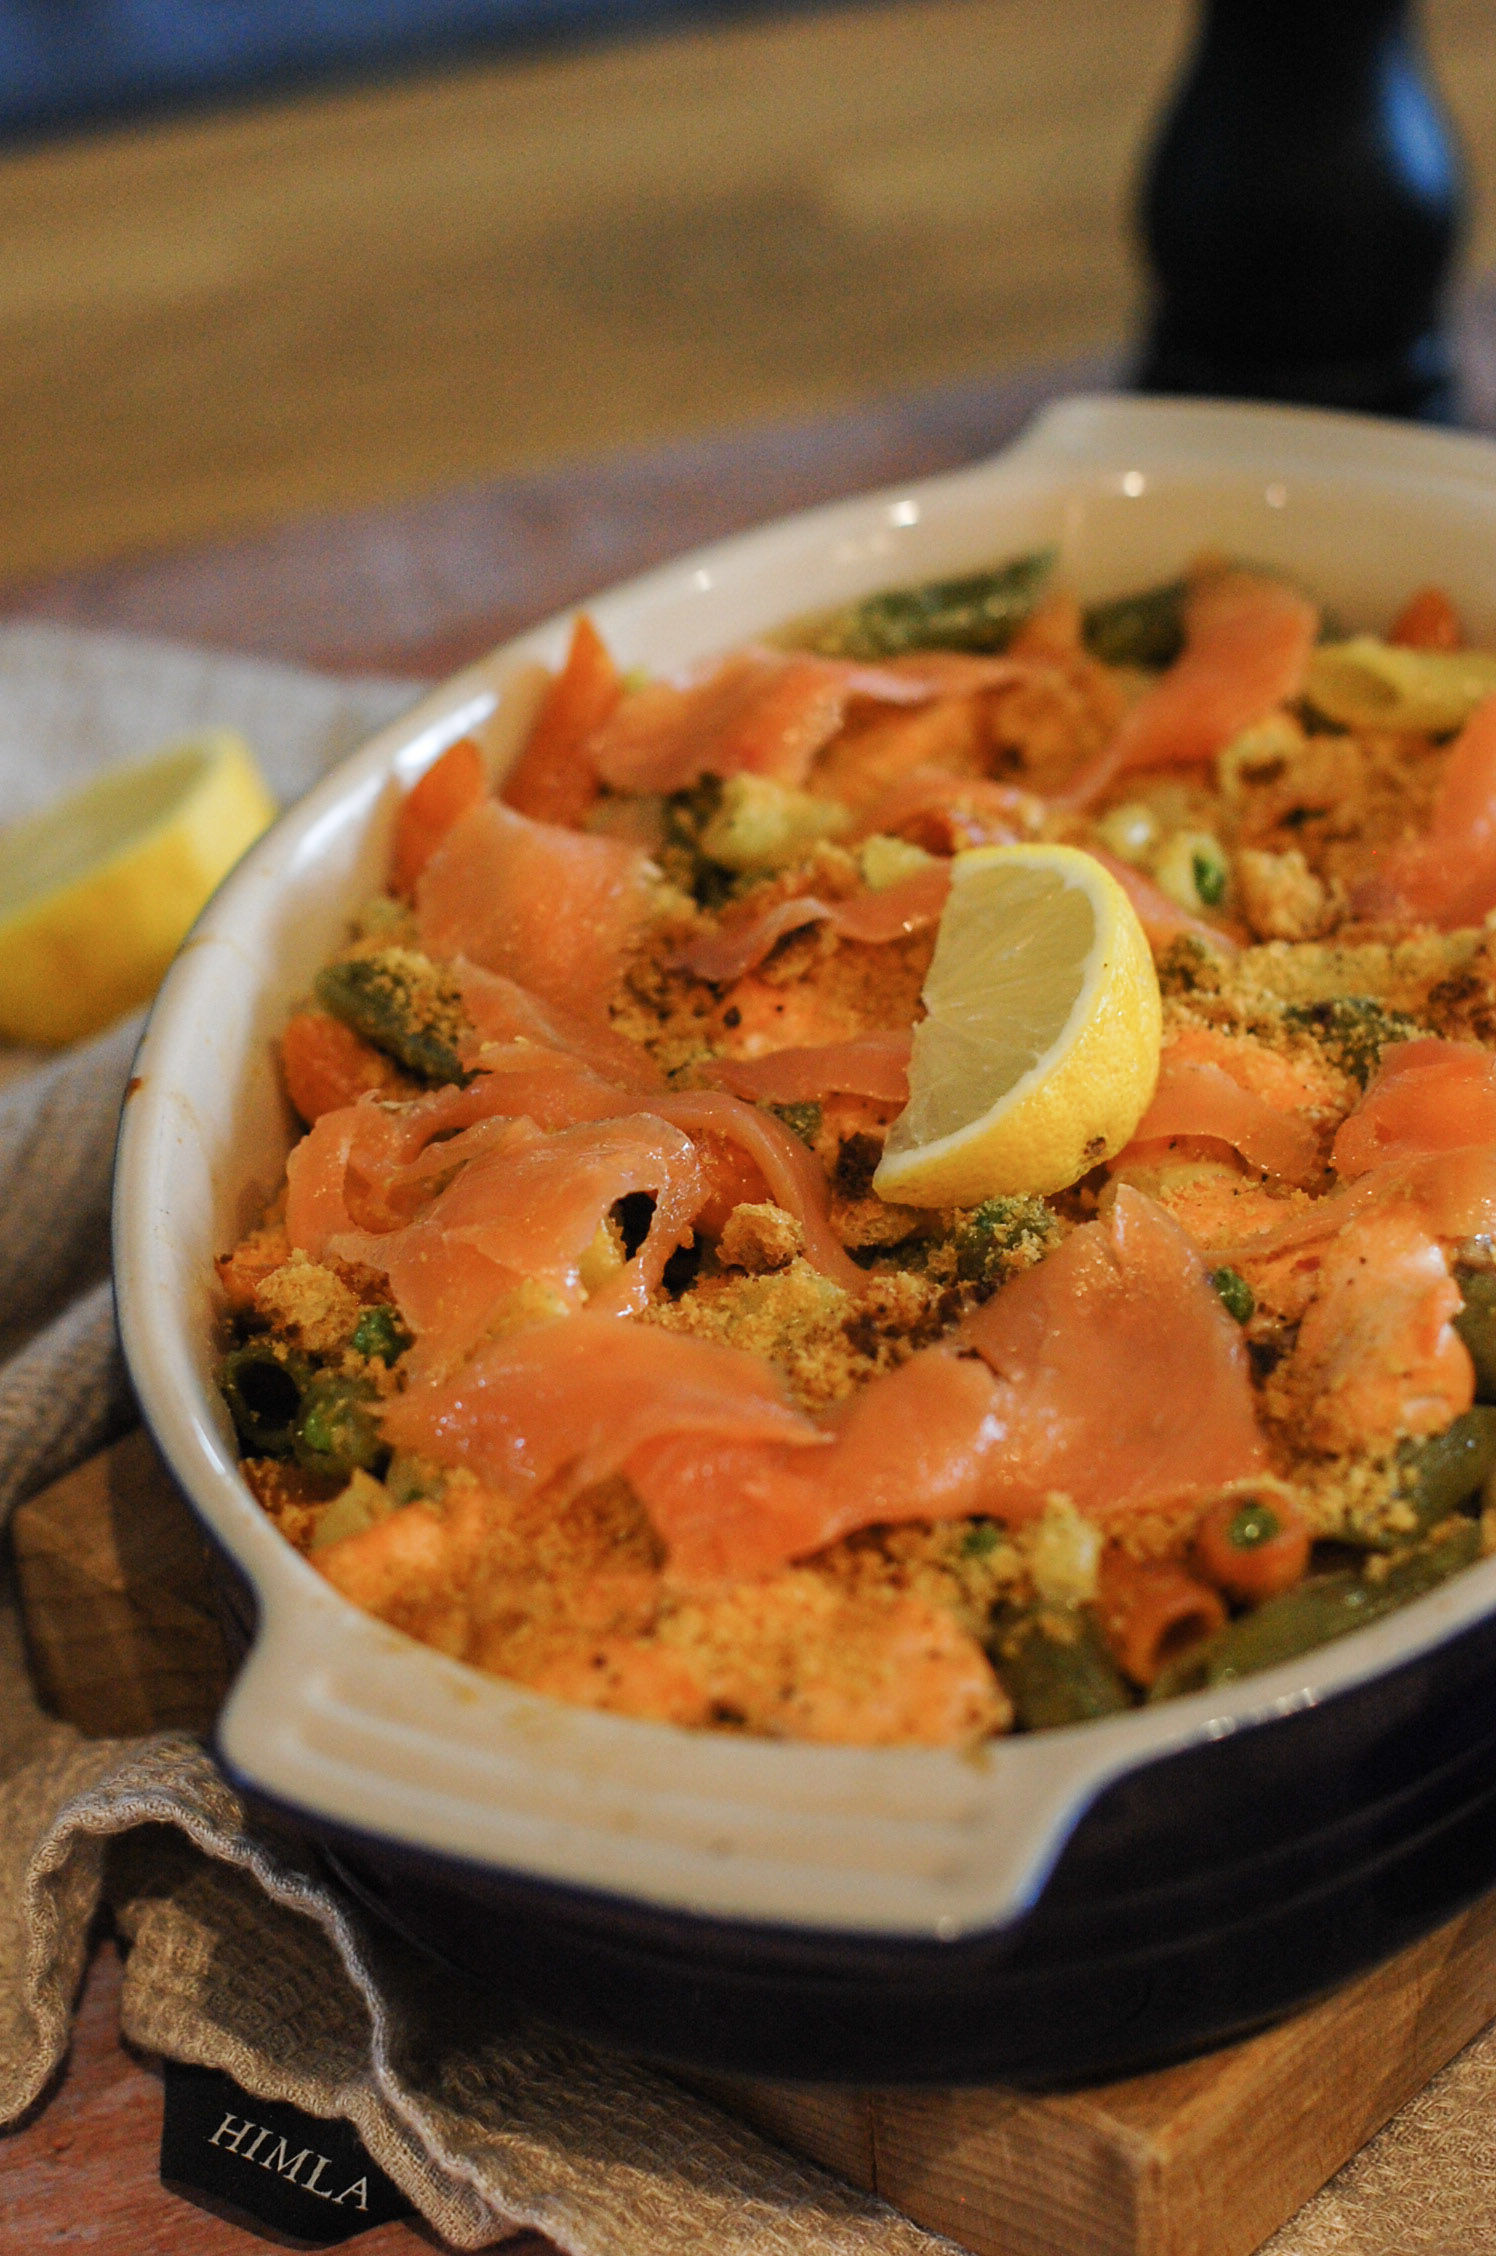 salmon pasta bake topped with smoked salmon and a lemon wedge